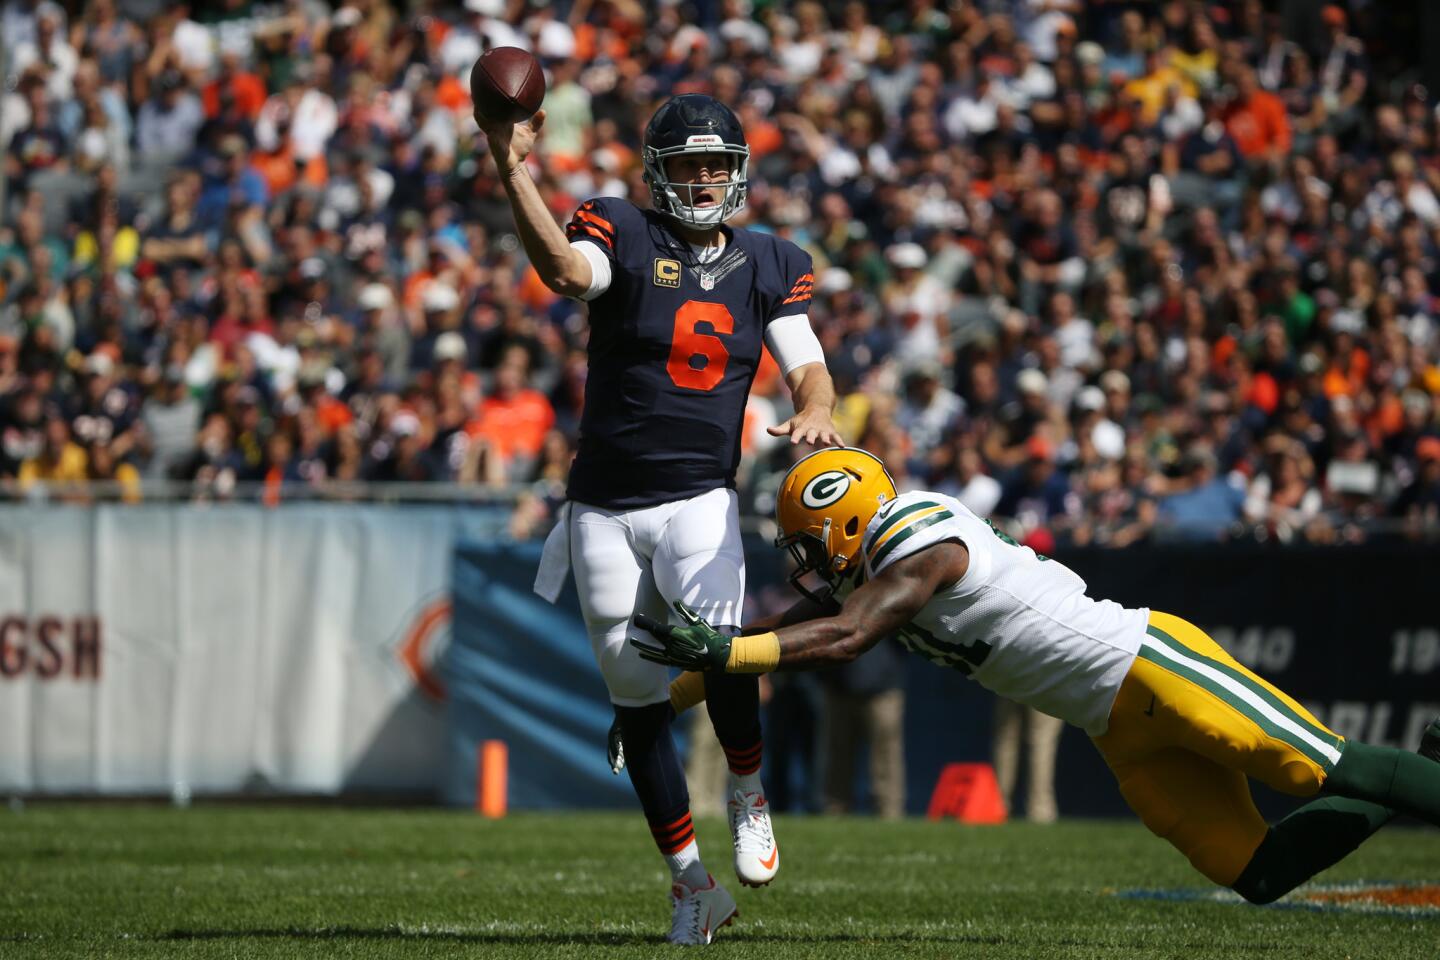 Jay Cutler tries to get off a pass before being tackled by Green Bay Packers linebacker Jay Elliott during the first quarter of their game.